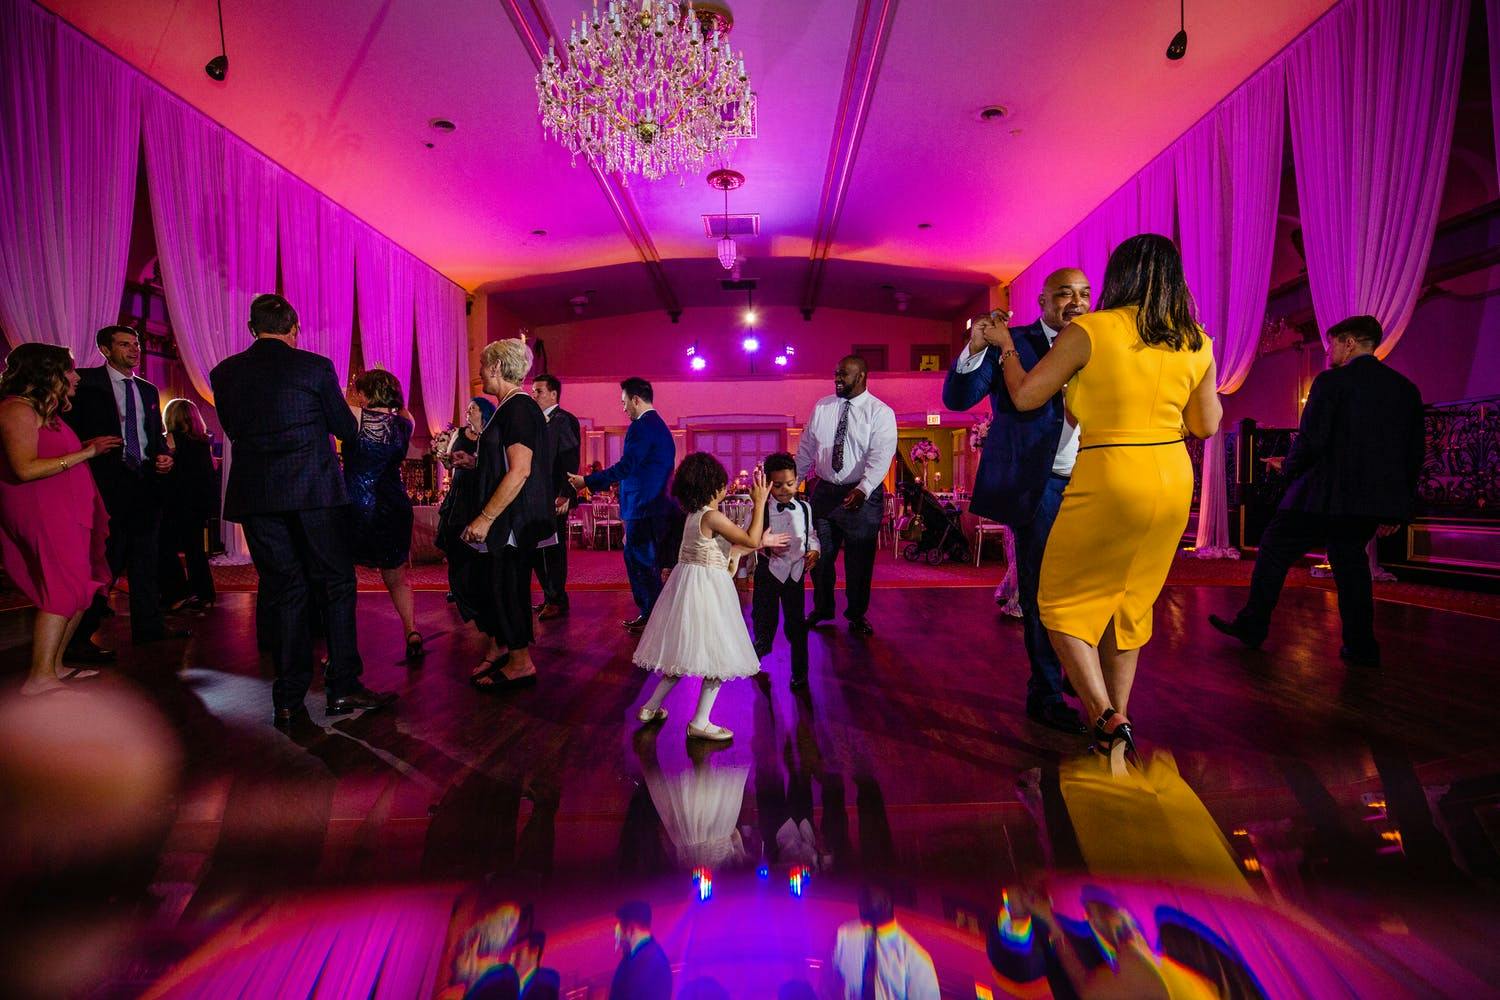 Friend and Family Dance on Mirrored Wedding Dance Floor Amidst Hot Pink Uplighting | PartySlate